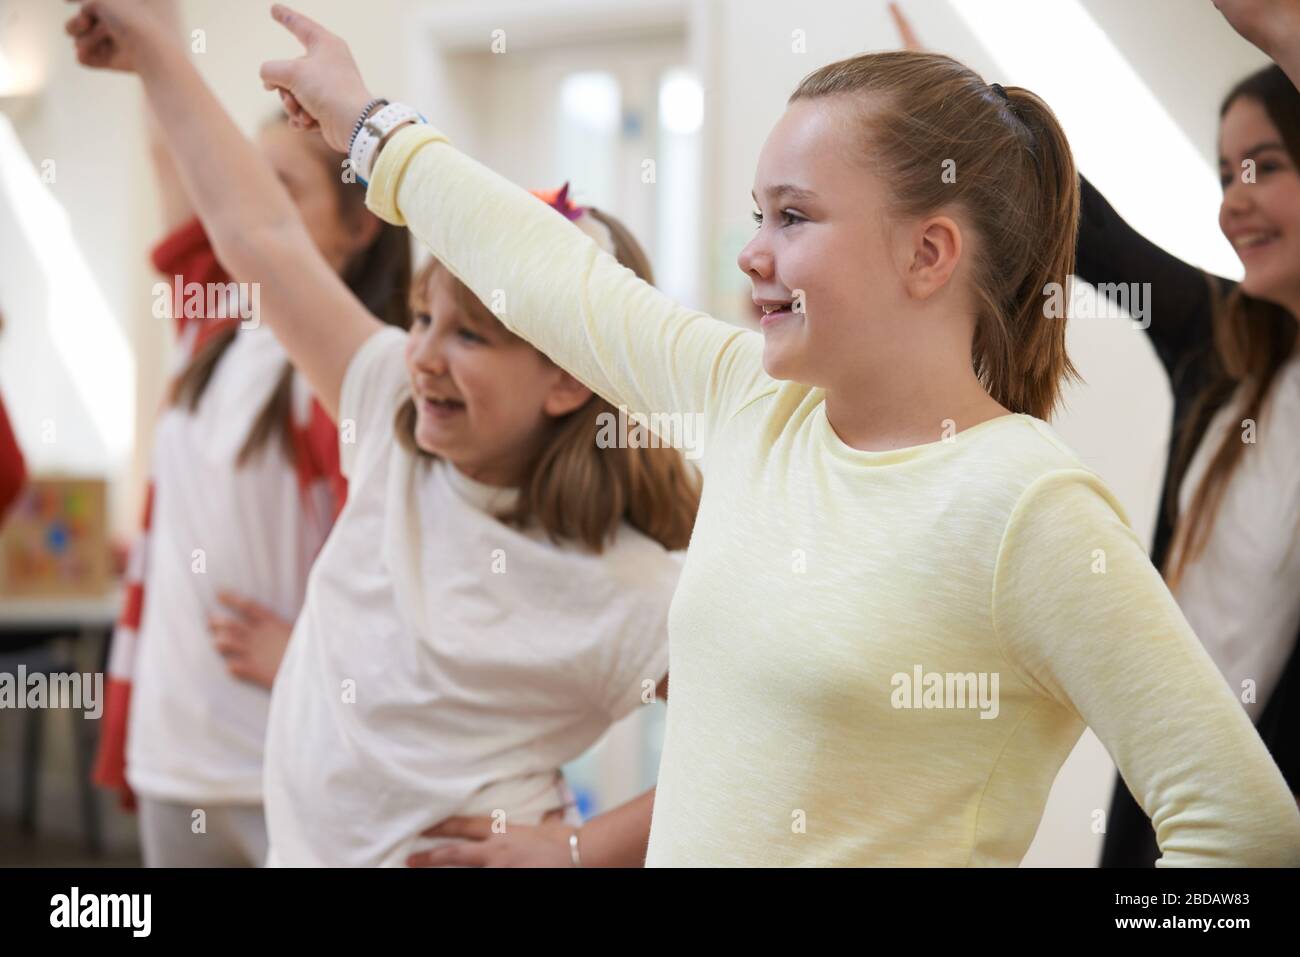 Group Of Children Enjoying Dance Lesson At Stage School Together Stock Photo